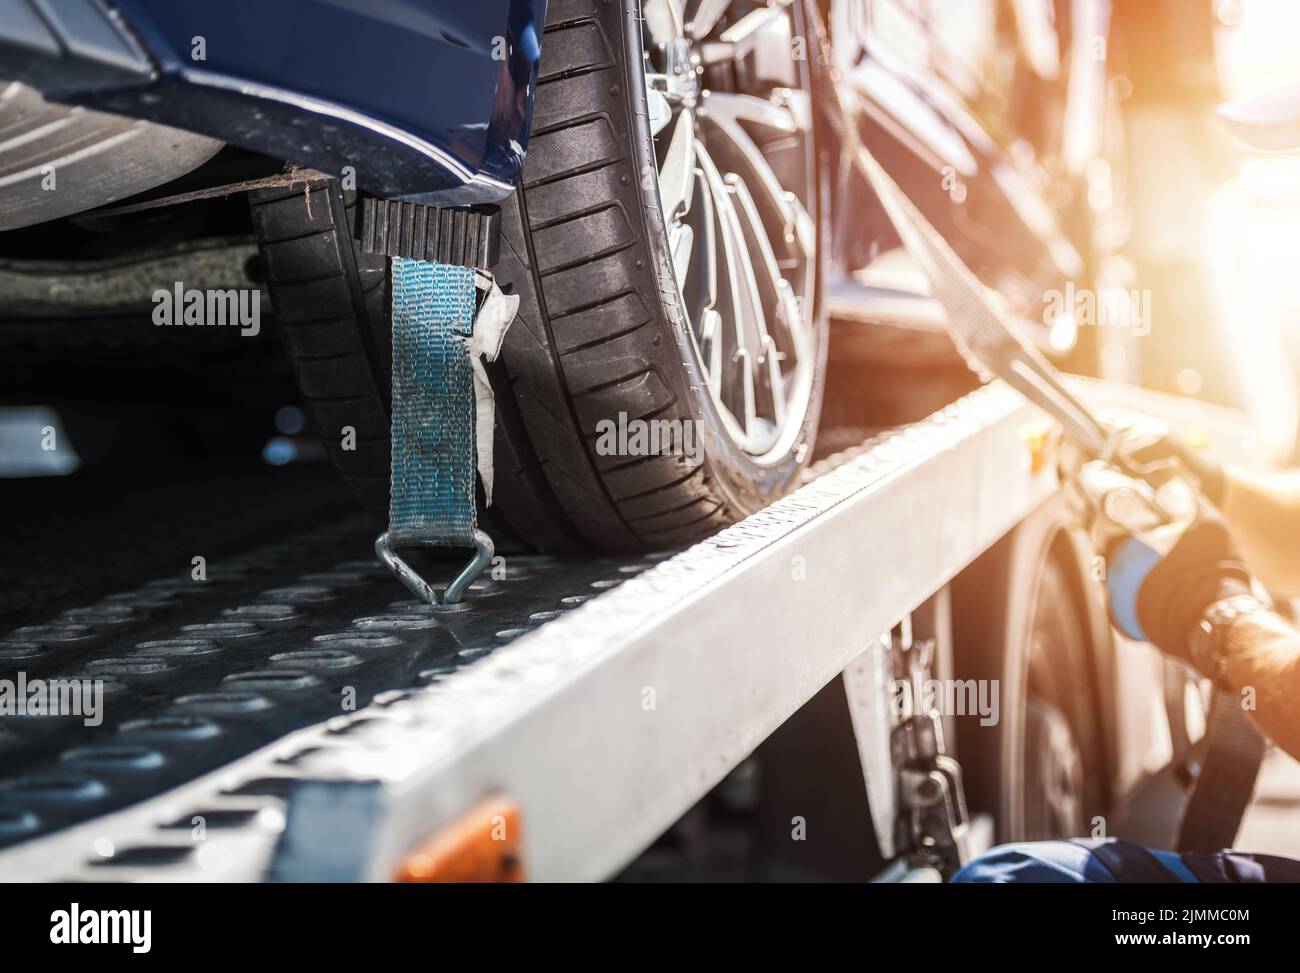 Closeup of Vehicle Wheel Secured on the Tow Truck with Tie Down Straps for Safe Transportation. Breakdown Assistance. Automotive Industry. Stock Photo